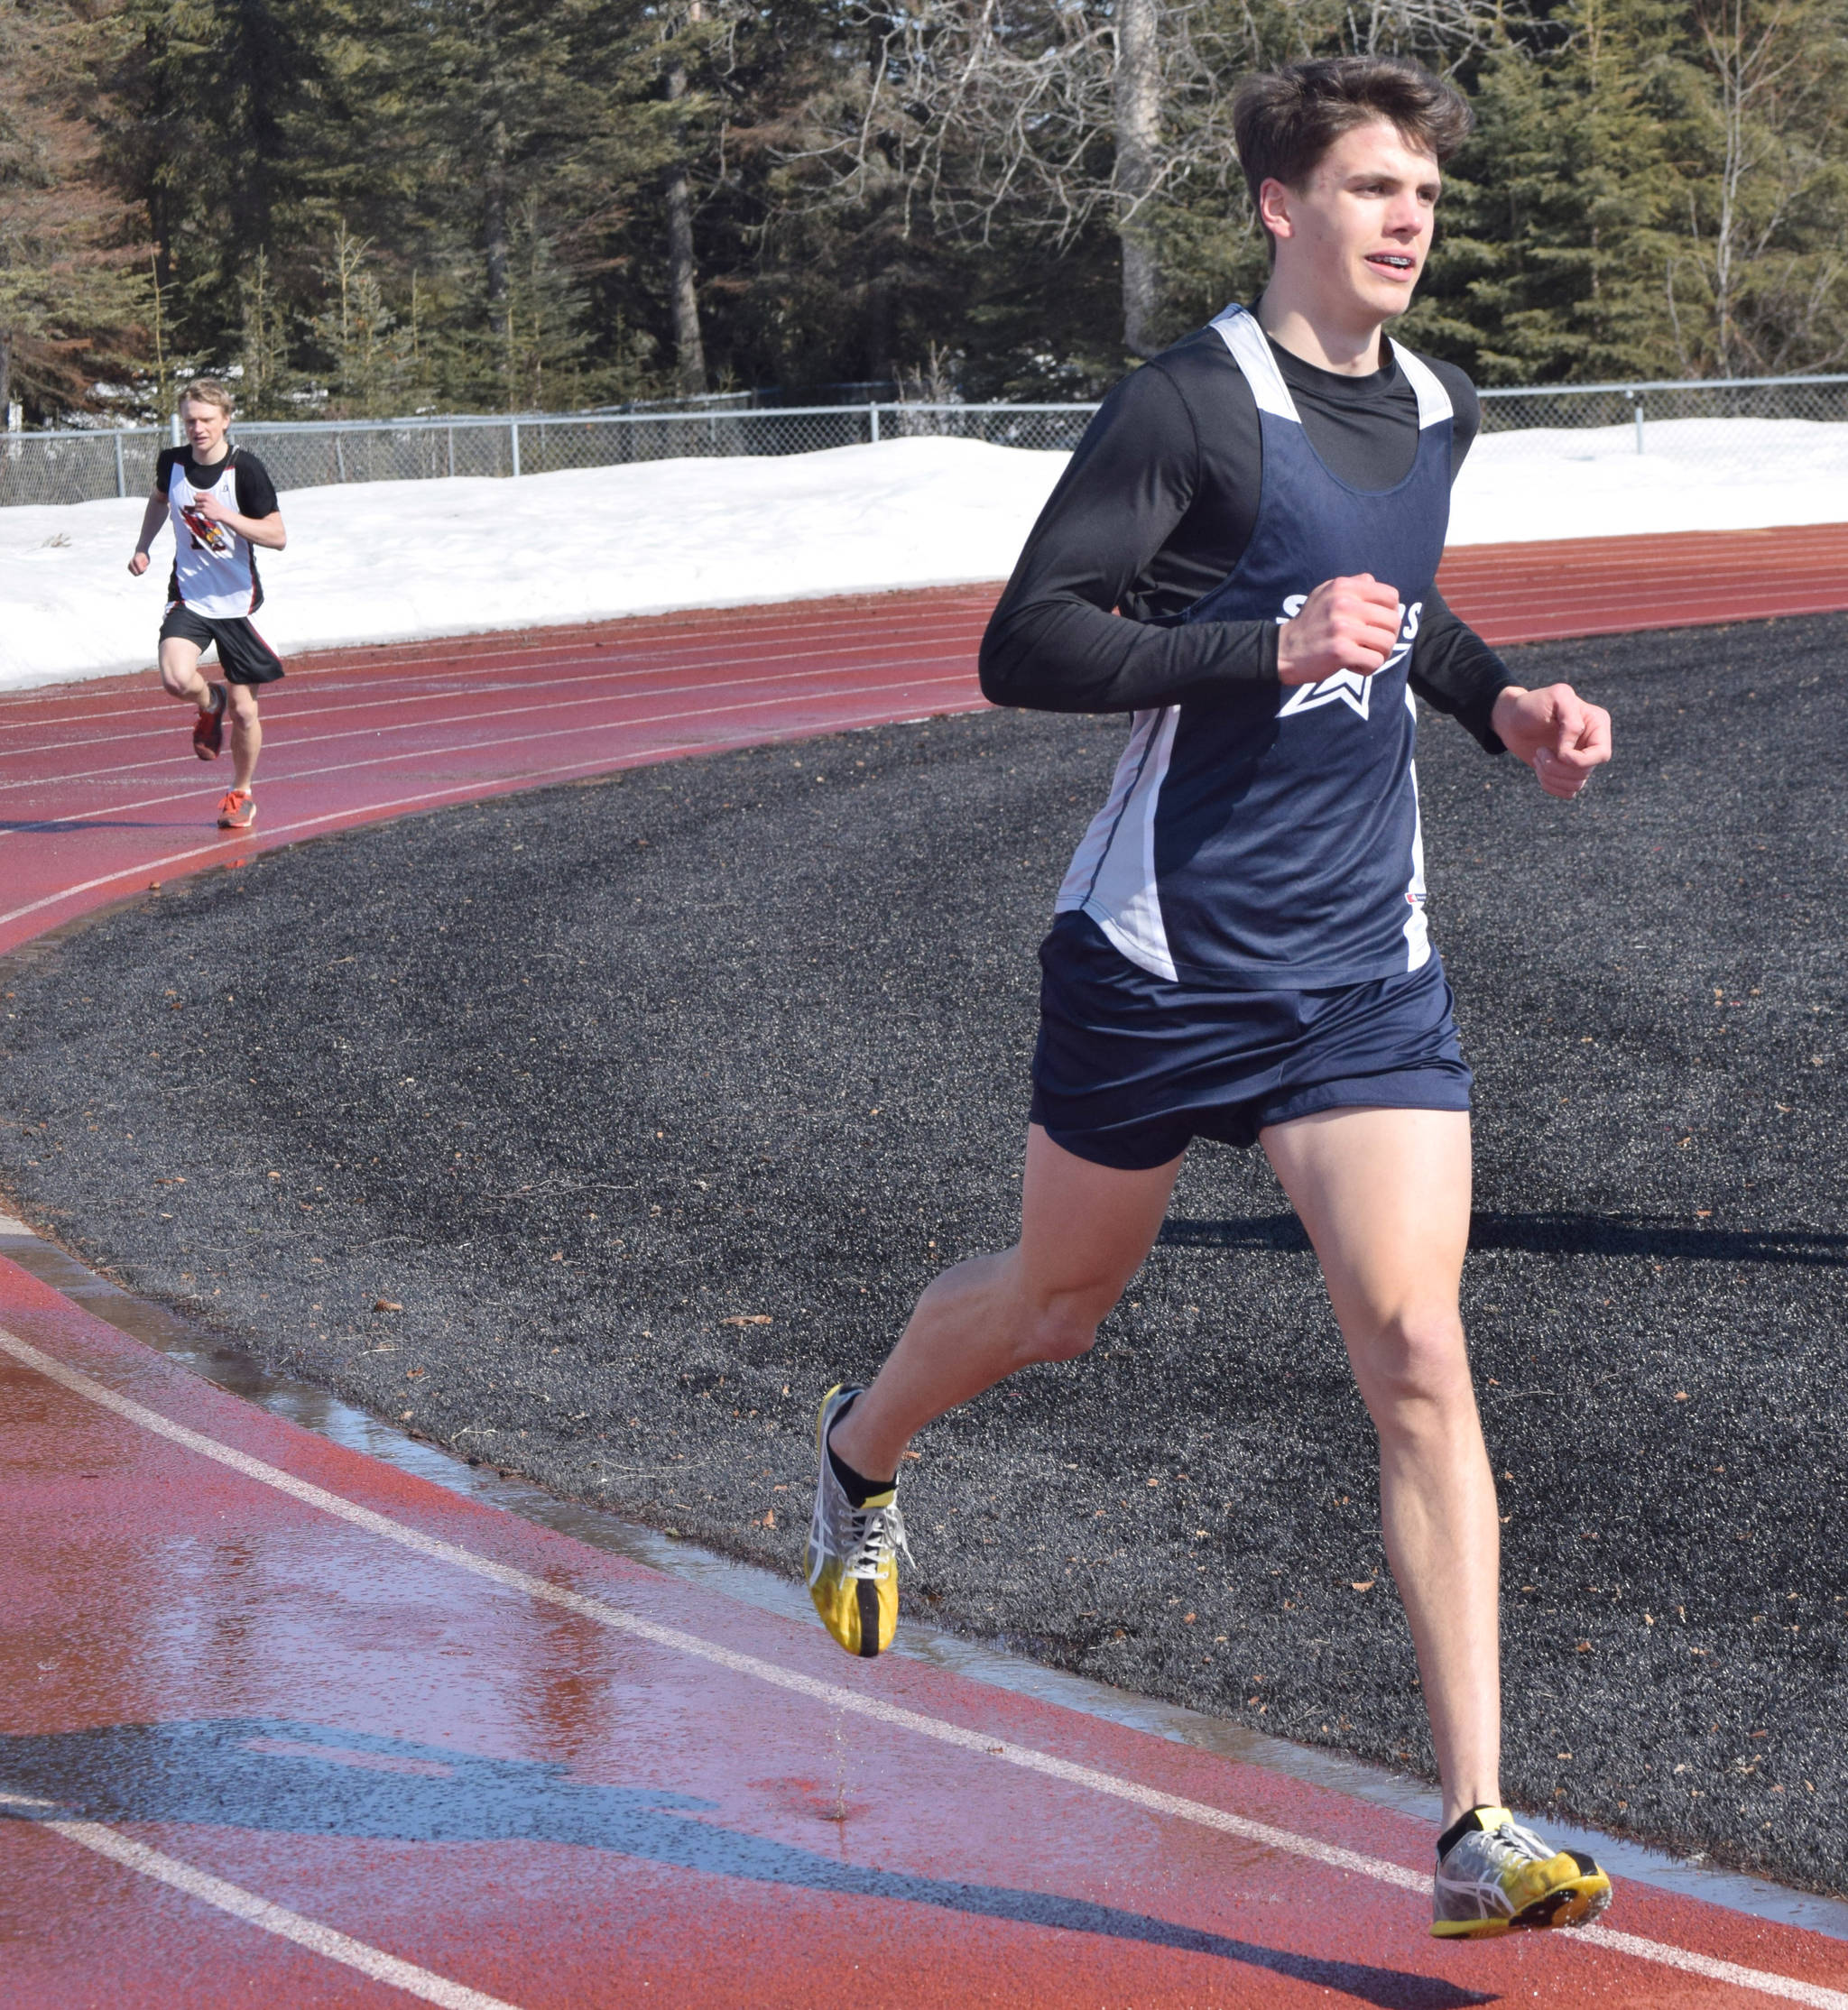 Soldotna’s Nathanael Johnson leads Kenai Central’s Jack Laker on the way to victory in the 1,600-meter run in a dual meet Friday, April 16, 2021, at Kenai Central High School in Kenai, Alaska. (Photo by Jeff Helminiak/Peninsula Clarion)